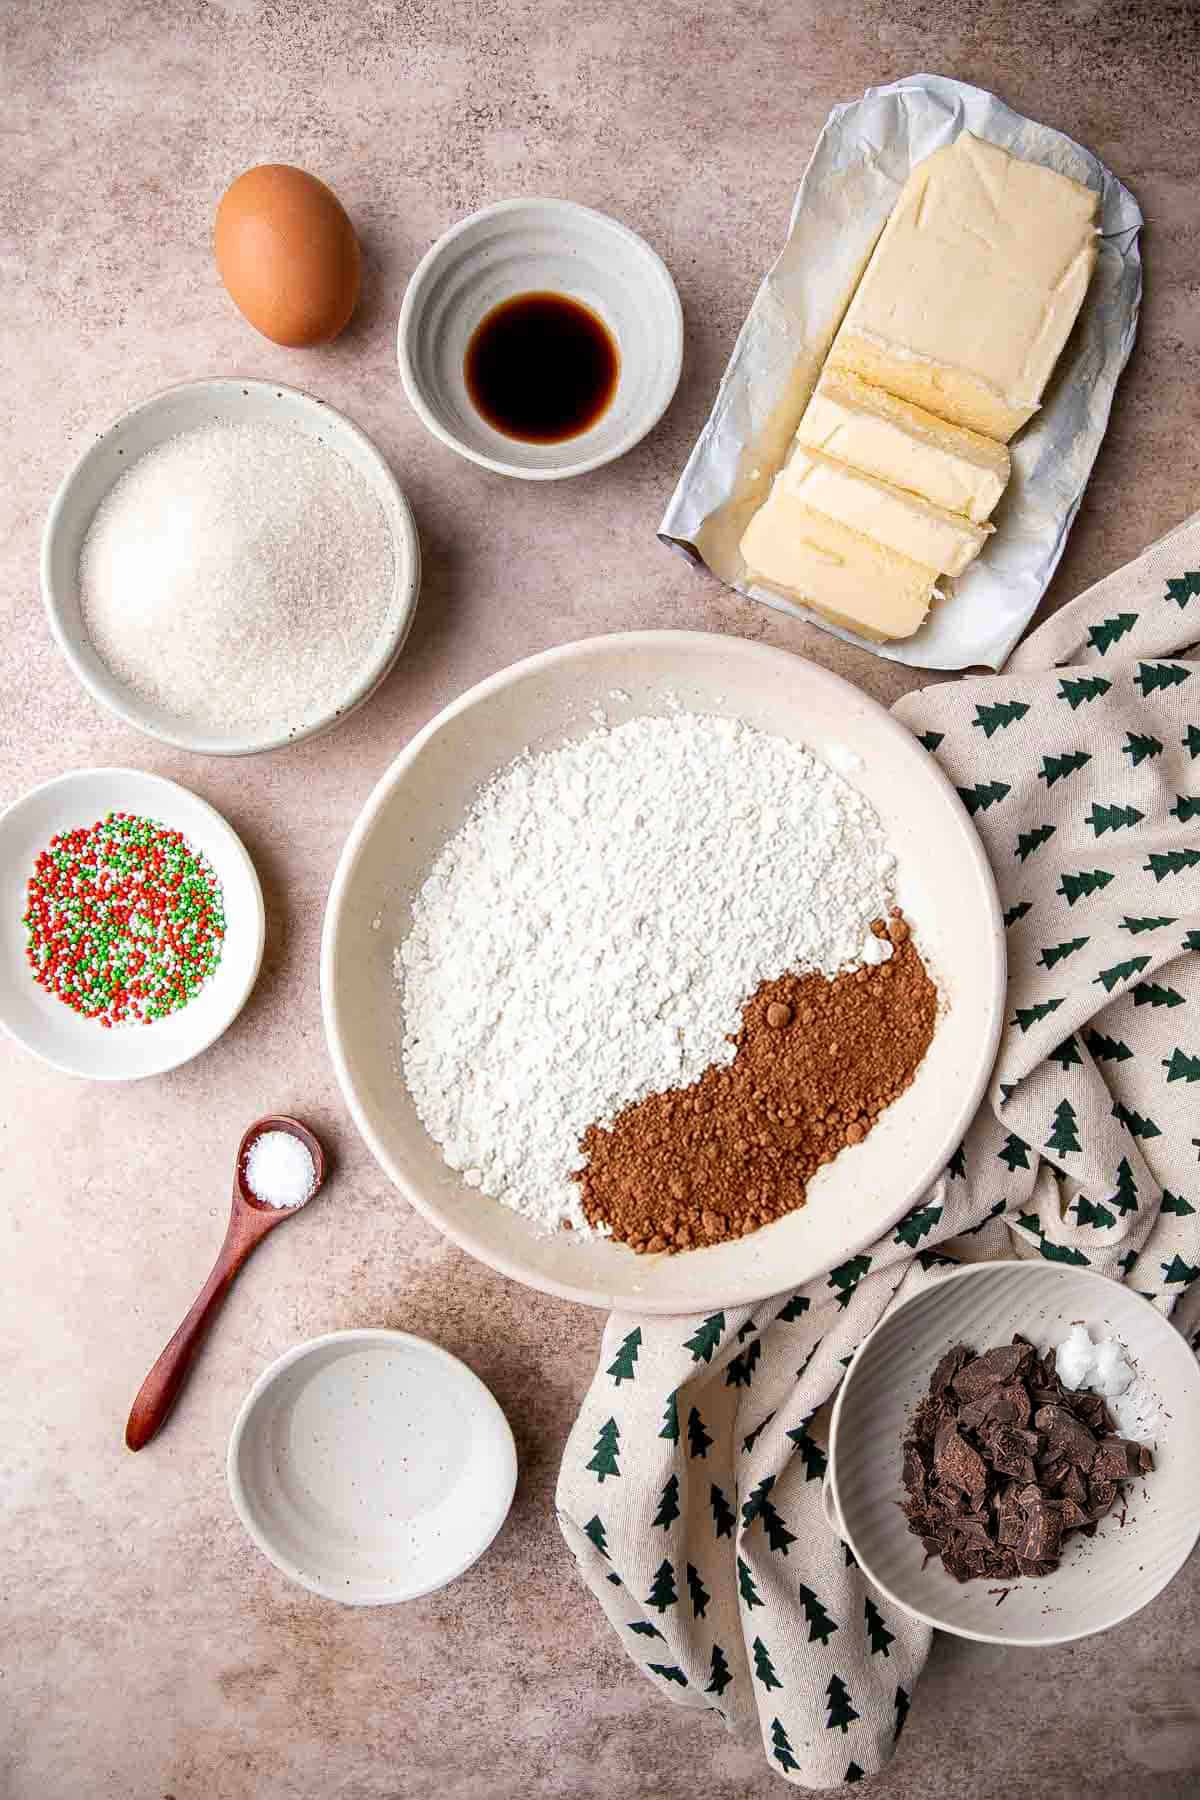 Chocolate Spritz Cookies are a rich and indulgent twist on classic buttery spritz cookies. Dip them in extra chocolate or top with colorful sprinkles. | aheadofthyme.com